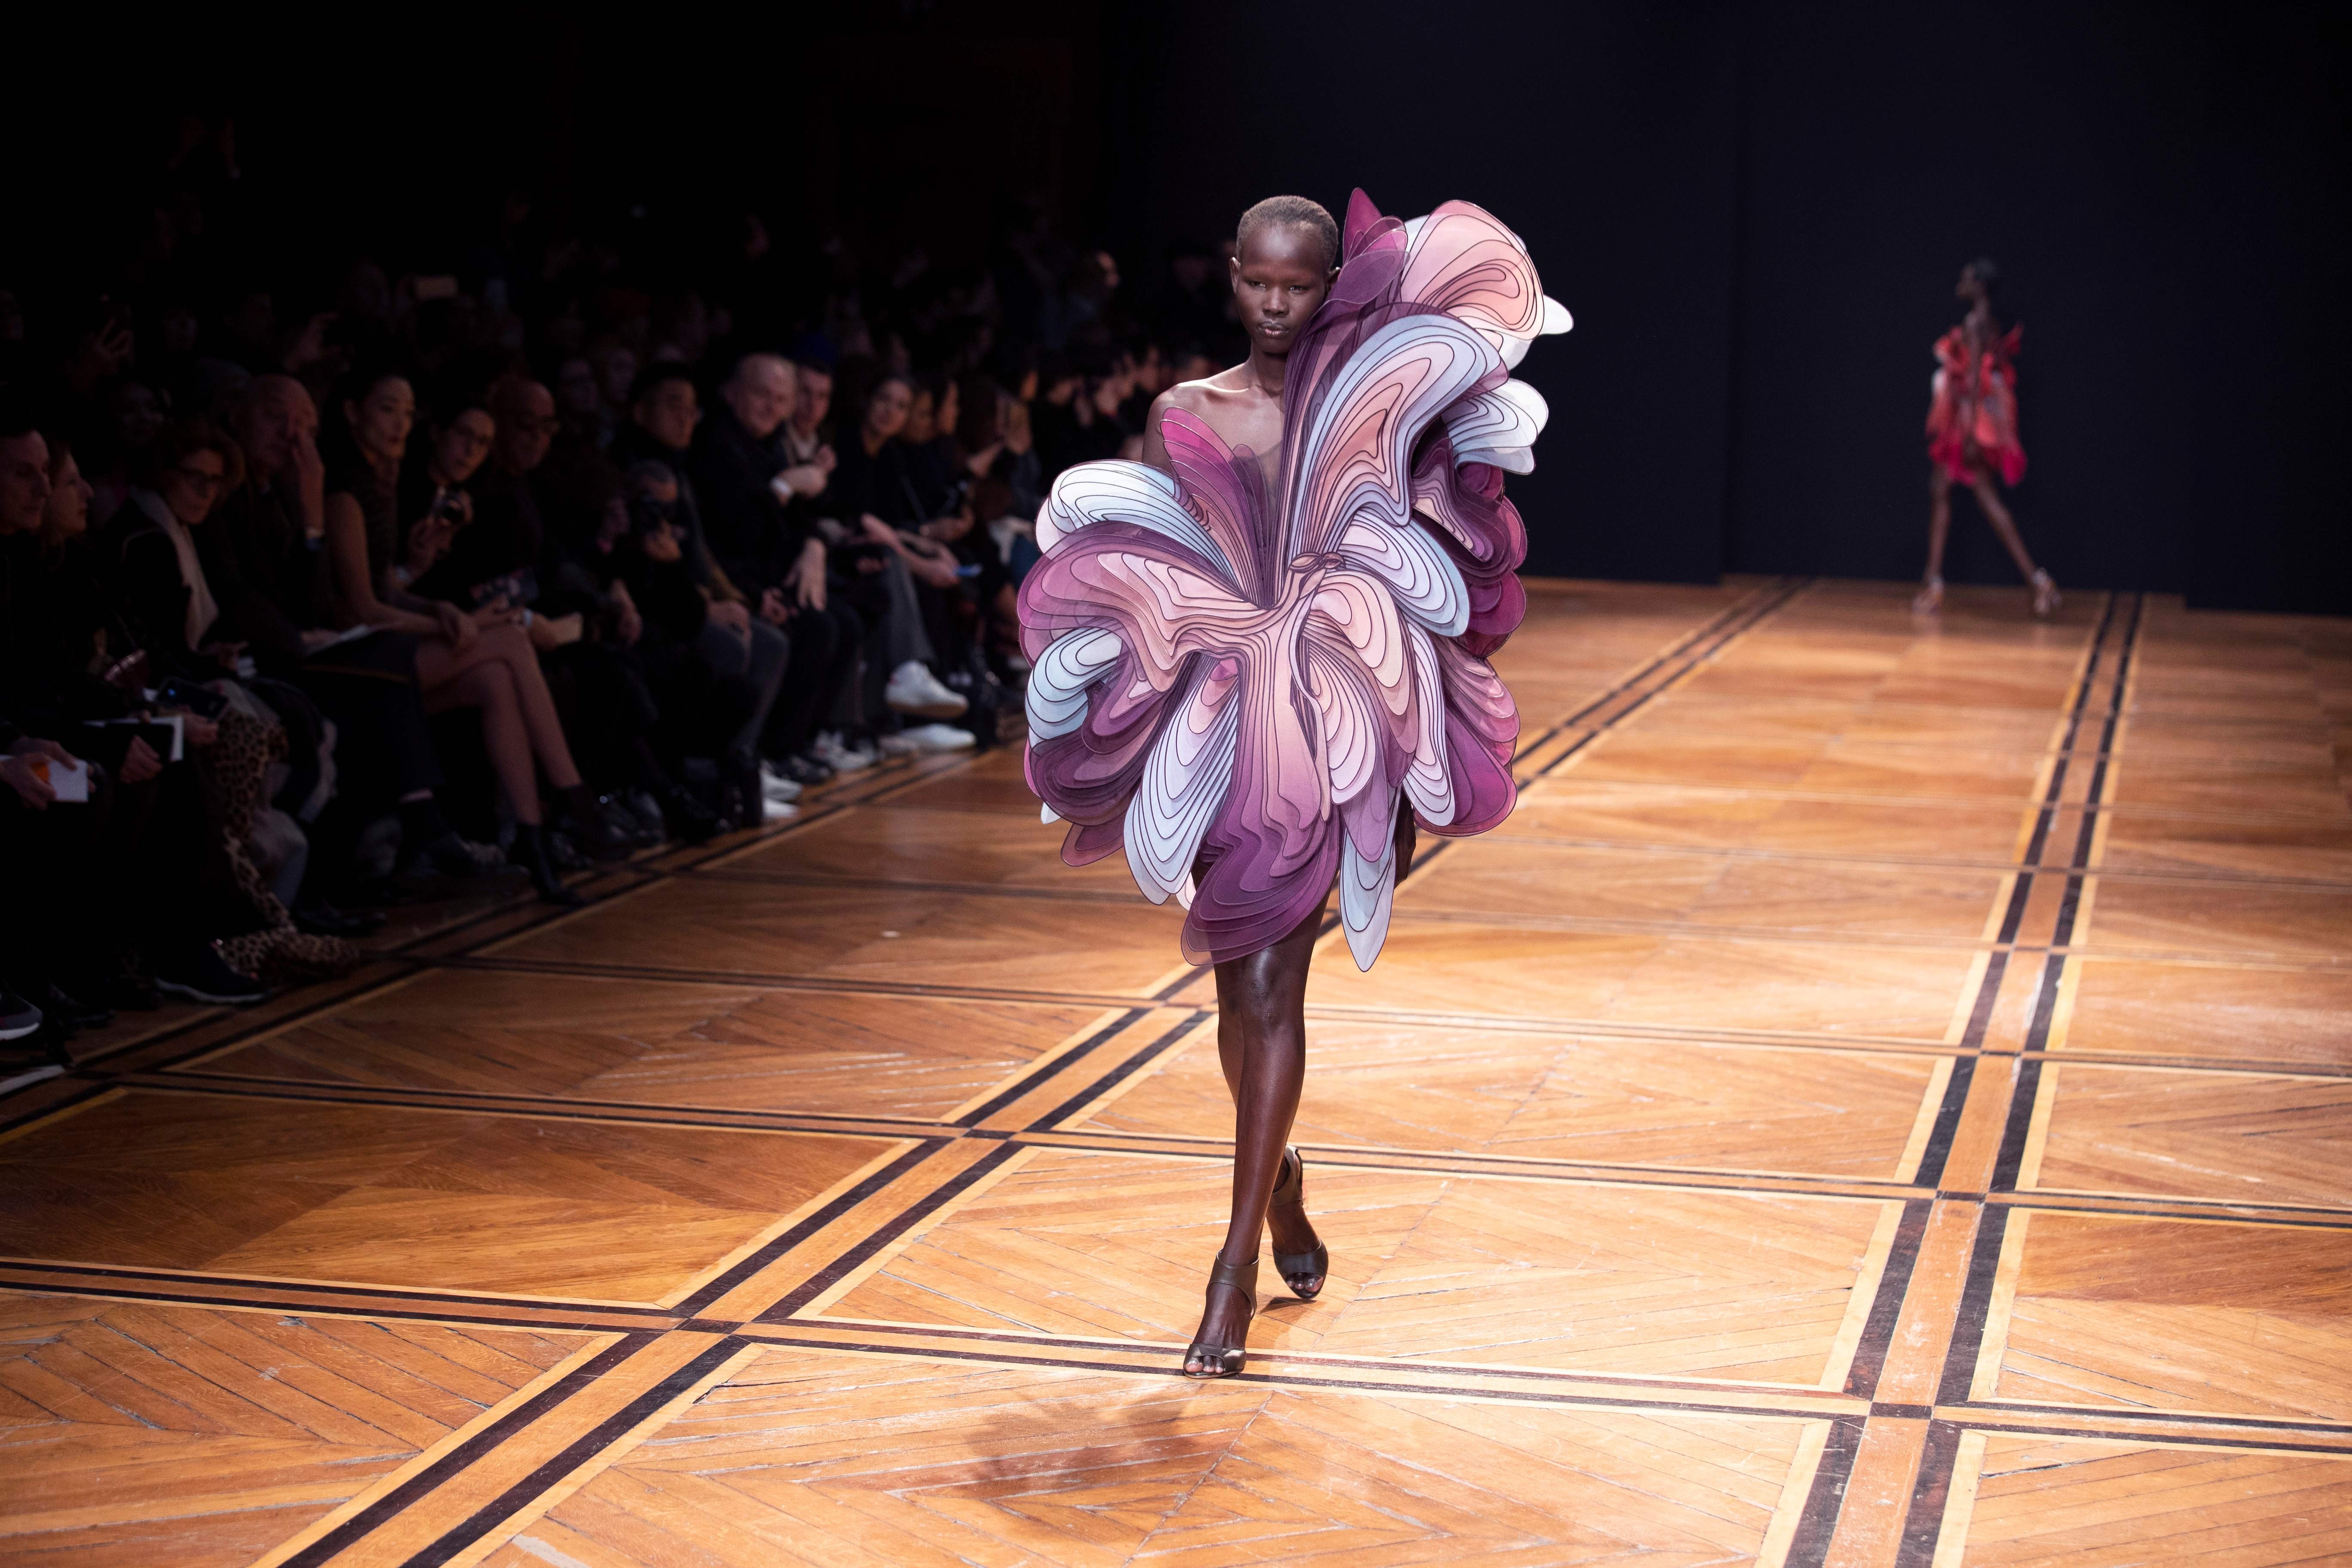 Paris Fashion Week: Iris van Herpen's 'flowing paint' gowns and Ralph &  Russo's 'Hollywood' glitz prove must-see shows